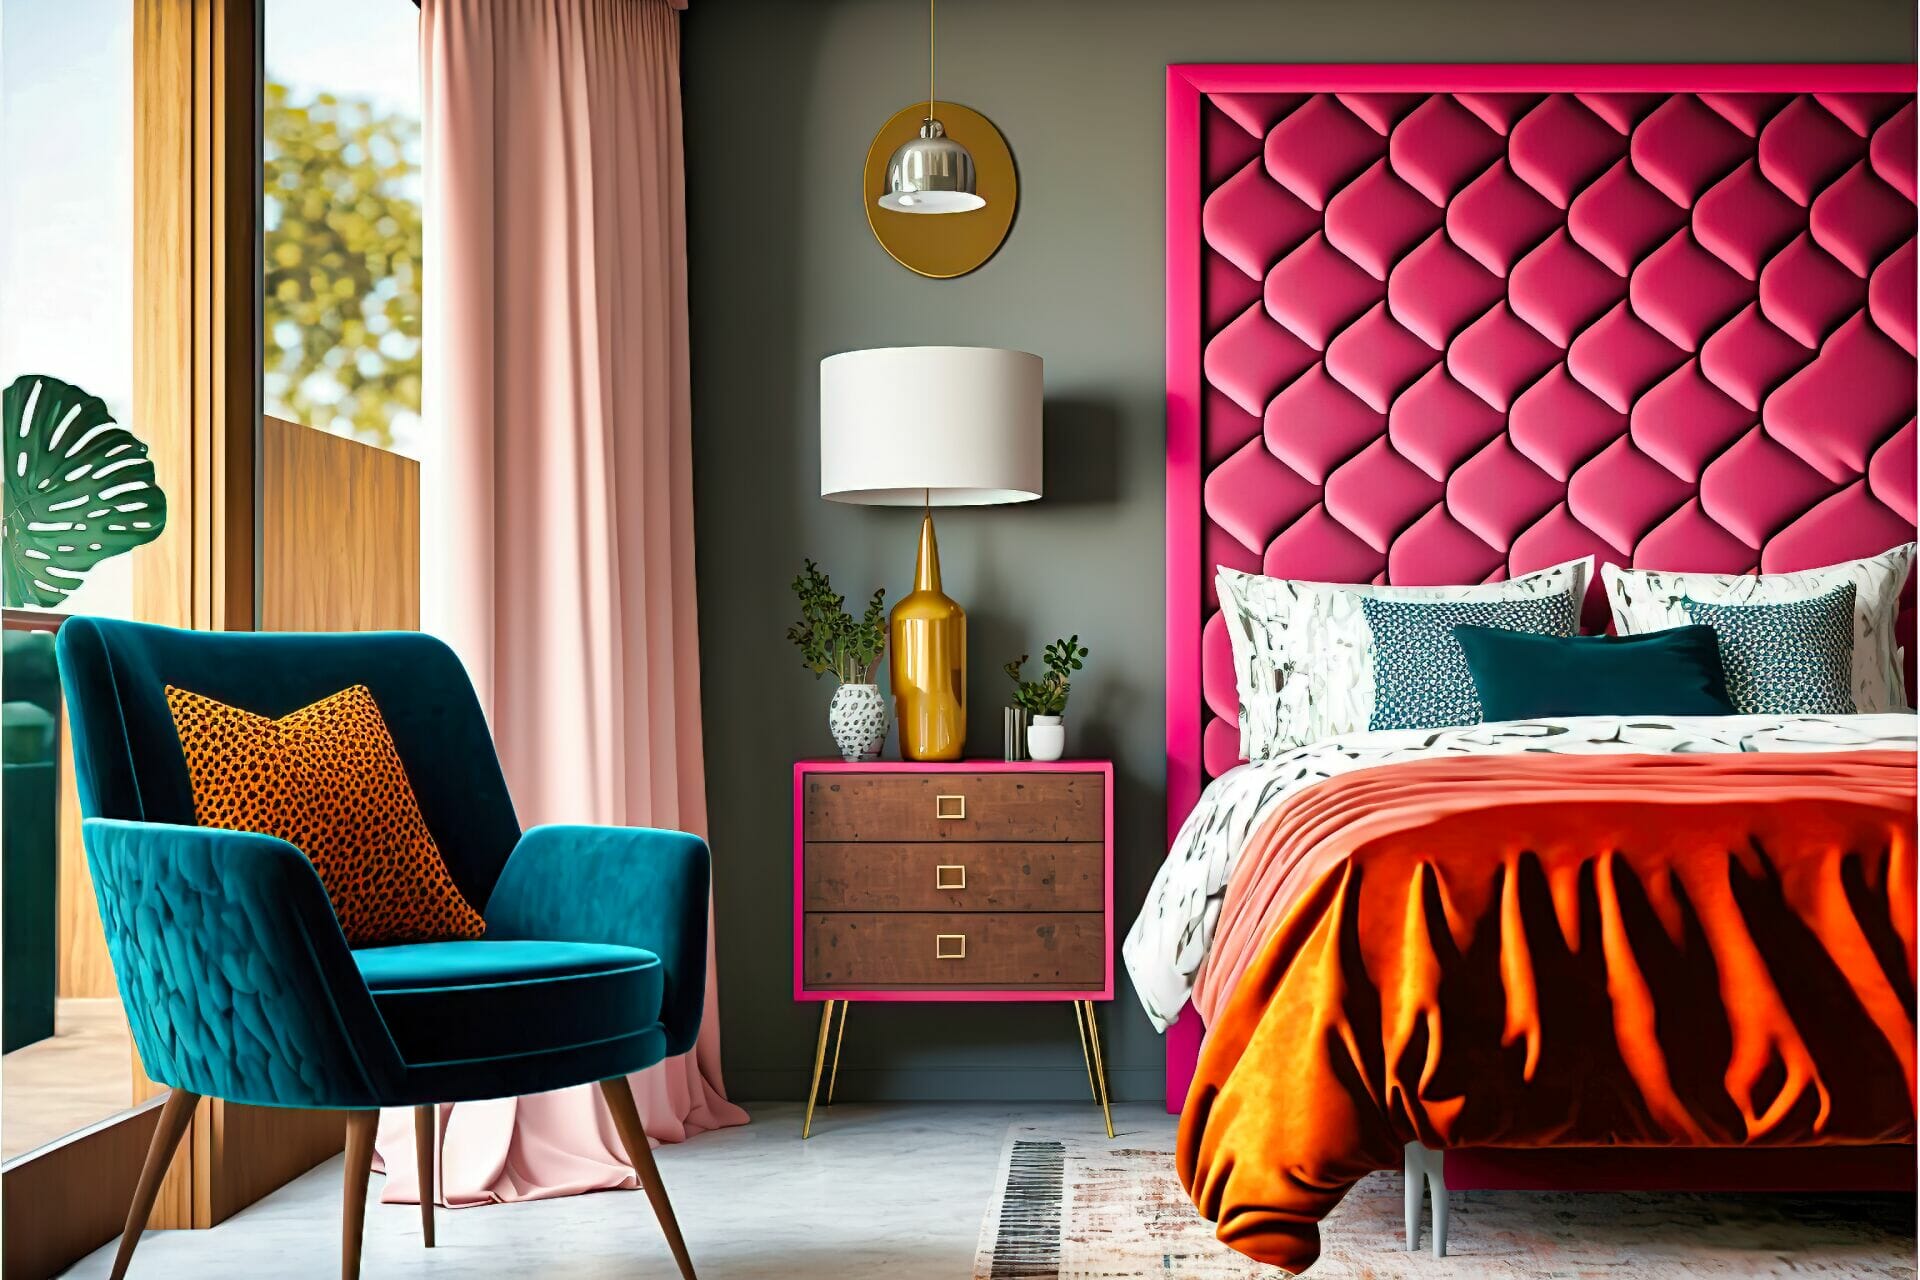 Mid-Century Modern Bedroom – A Vibrant Modern Bedroom Featuring A Velvet Headboard With A Bold Geometric Pattern, A Bright Pink Armchair, And A Macrame Wall Hanging.